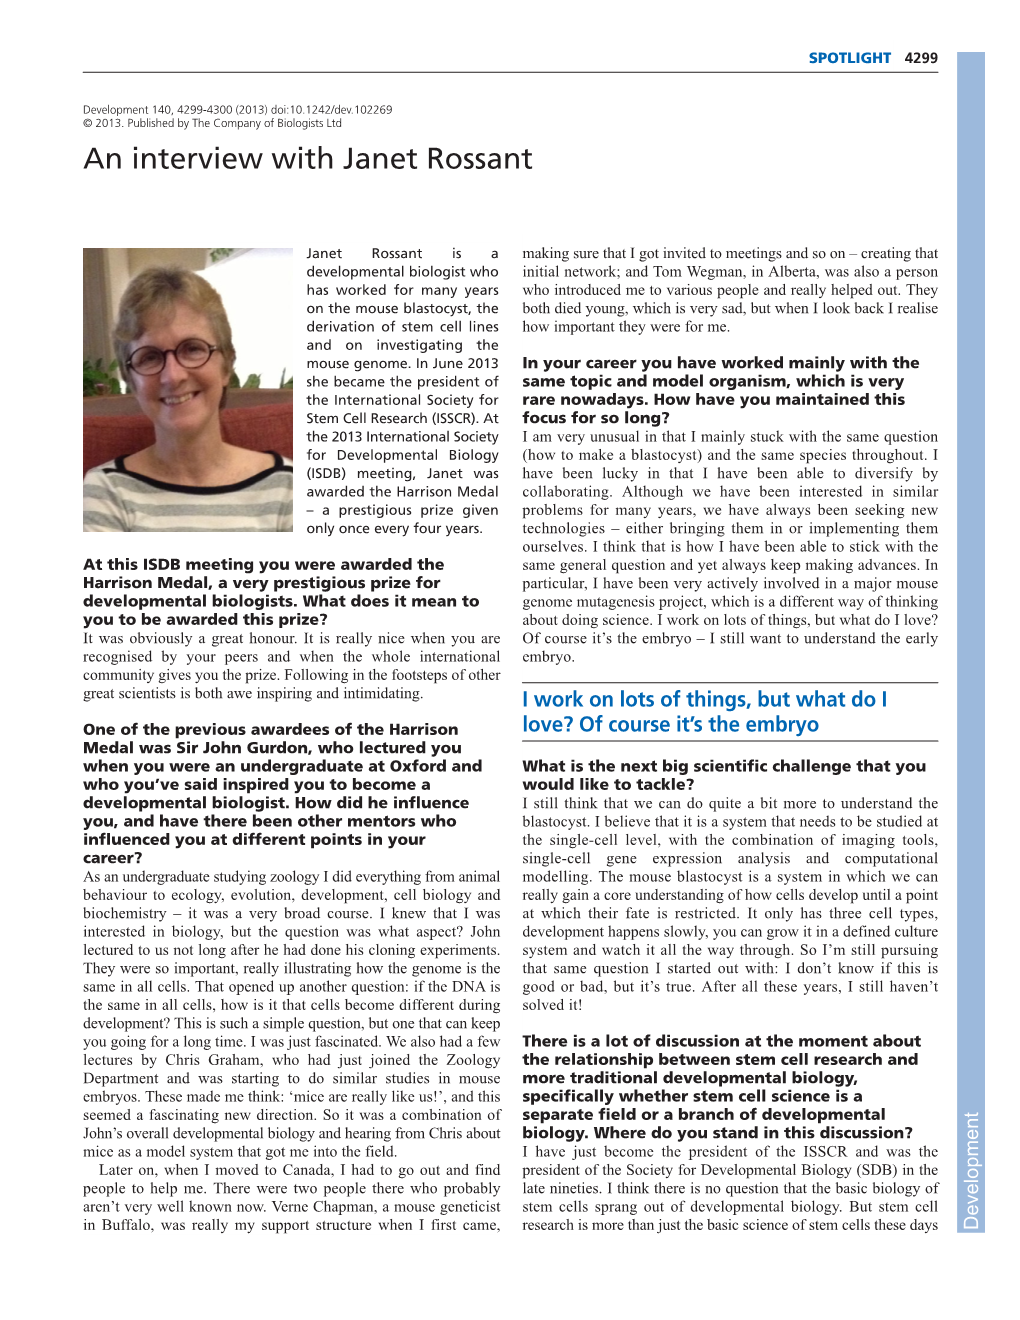 An Interview with Janet Rossant